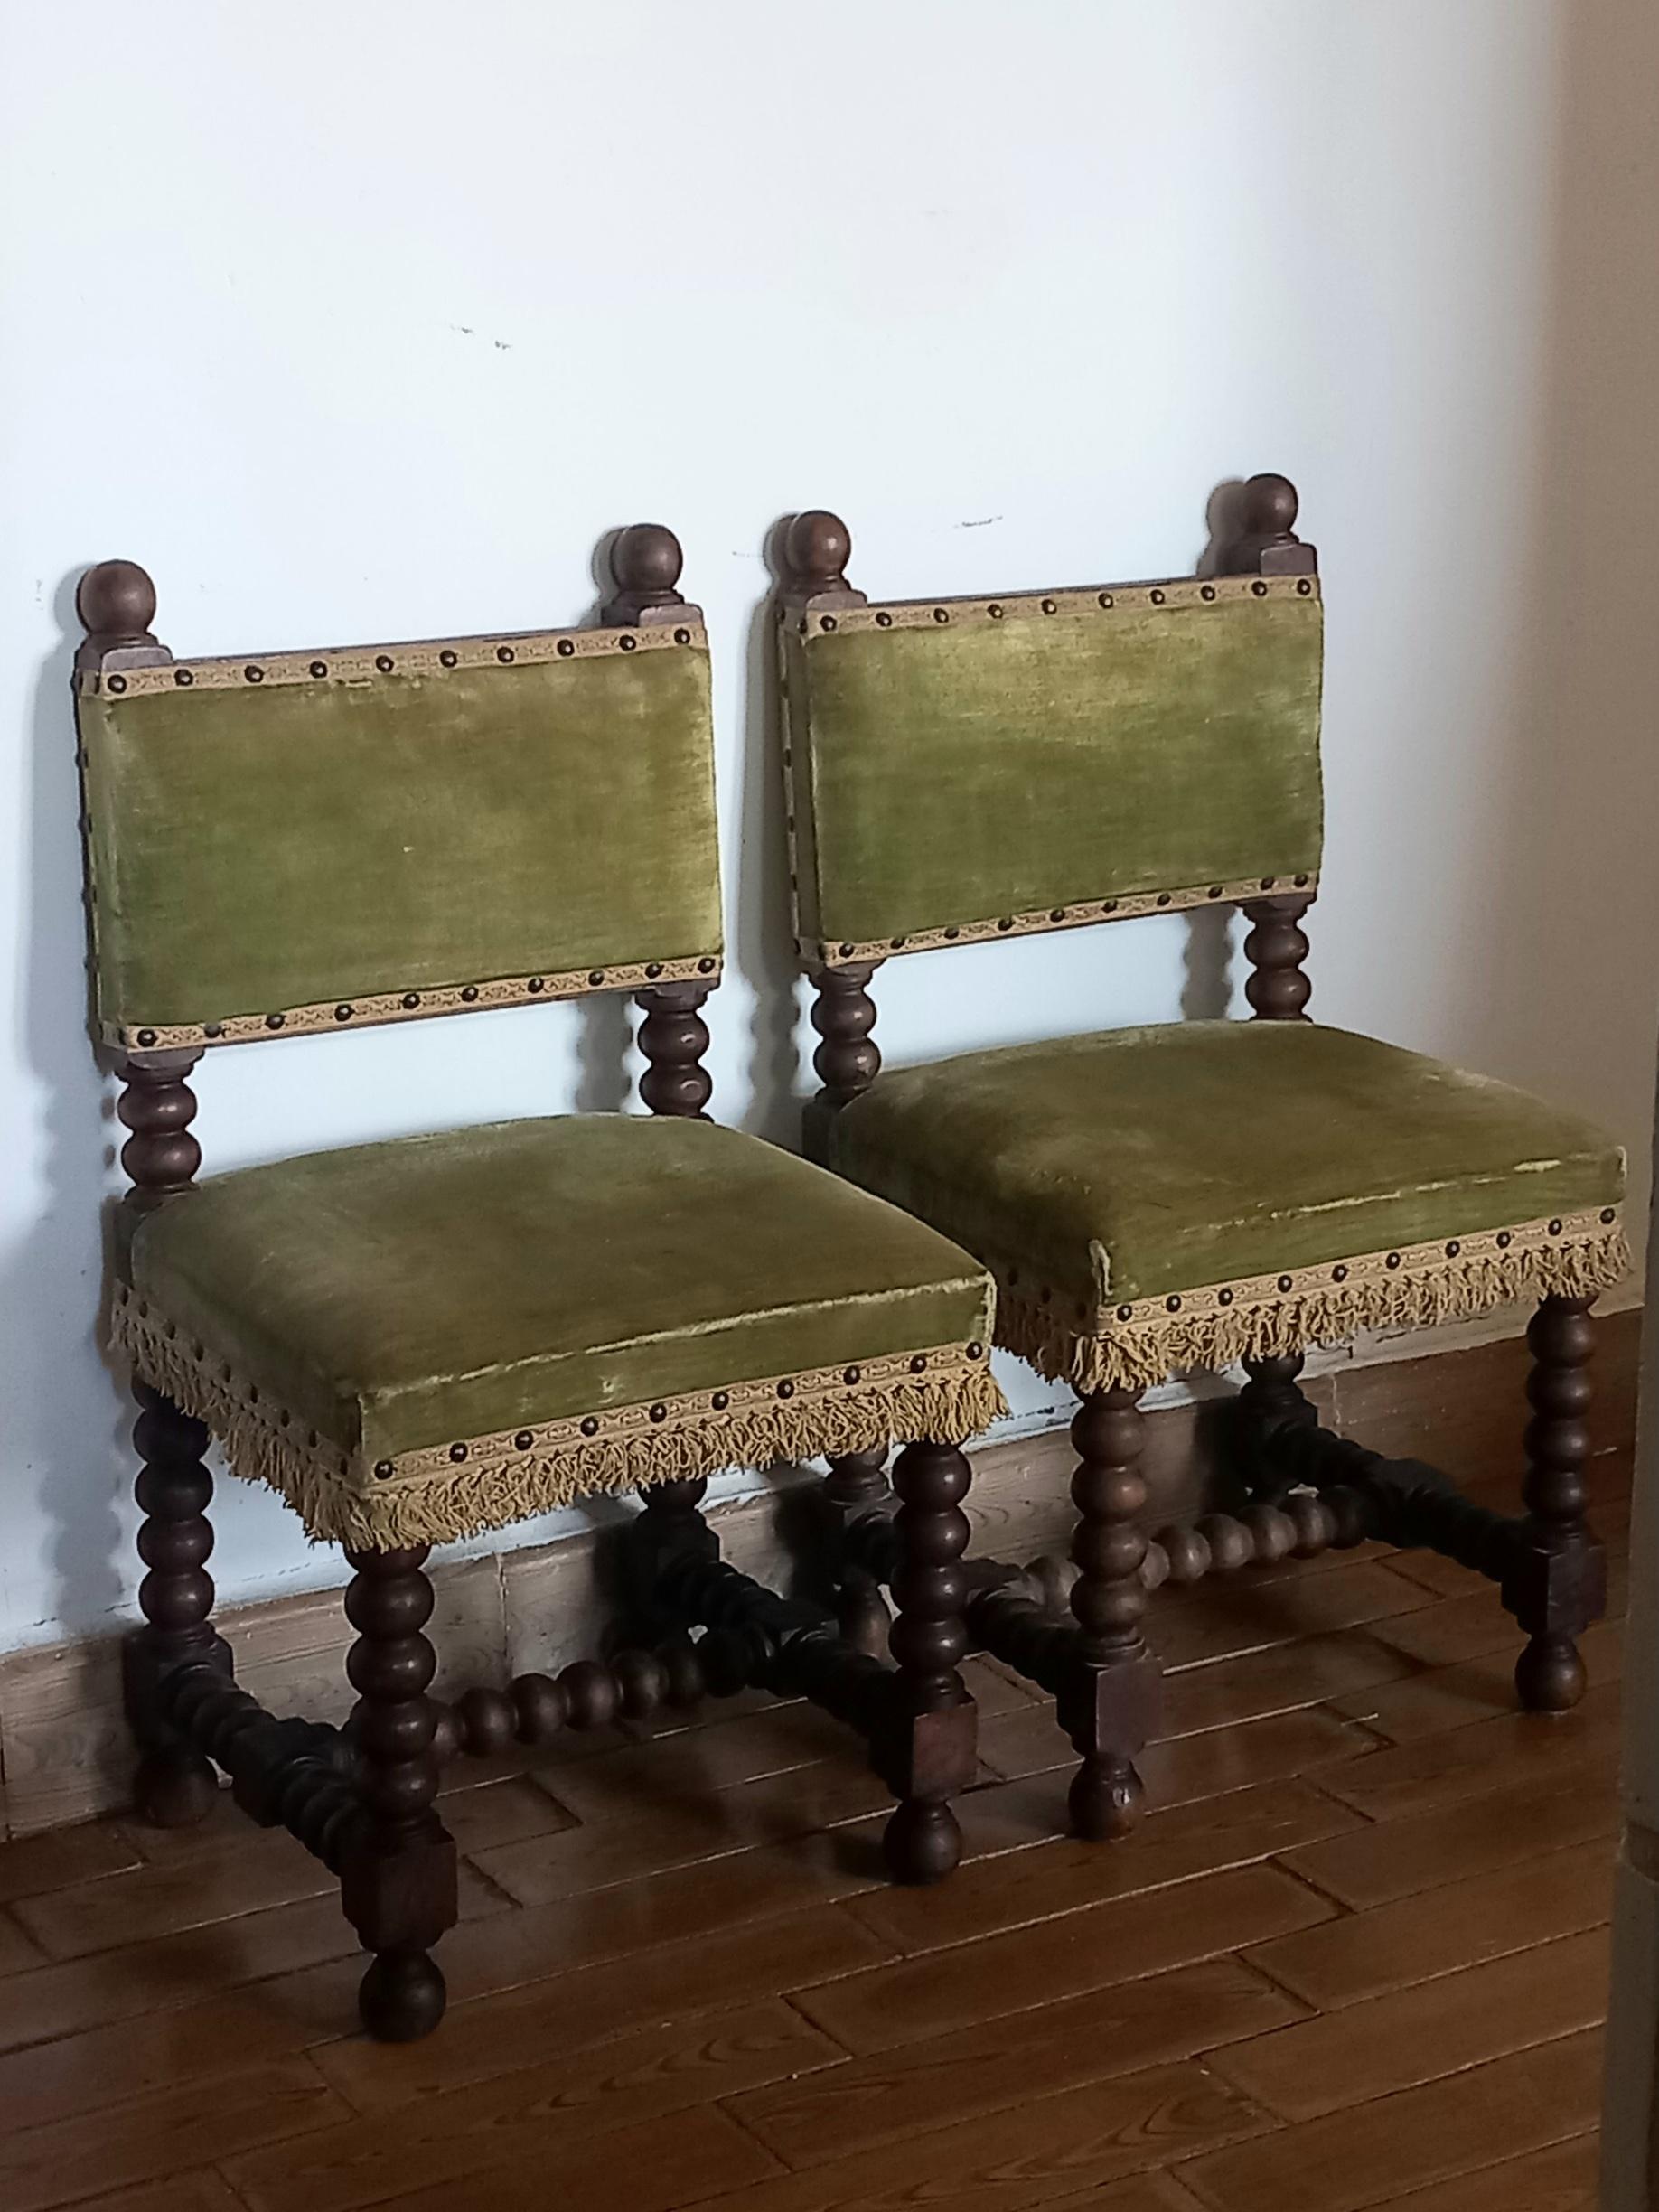 Pair of small chairs or stools with backrests and turned legs in the shape of a cabolla. They are made of fruit or oak wood and the seat and back are upholstered with green velvet topped with fringes and studs.
  They are two spectacular, precious